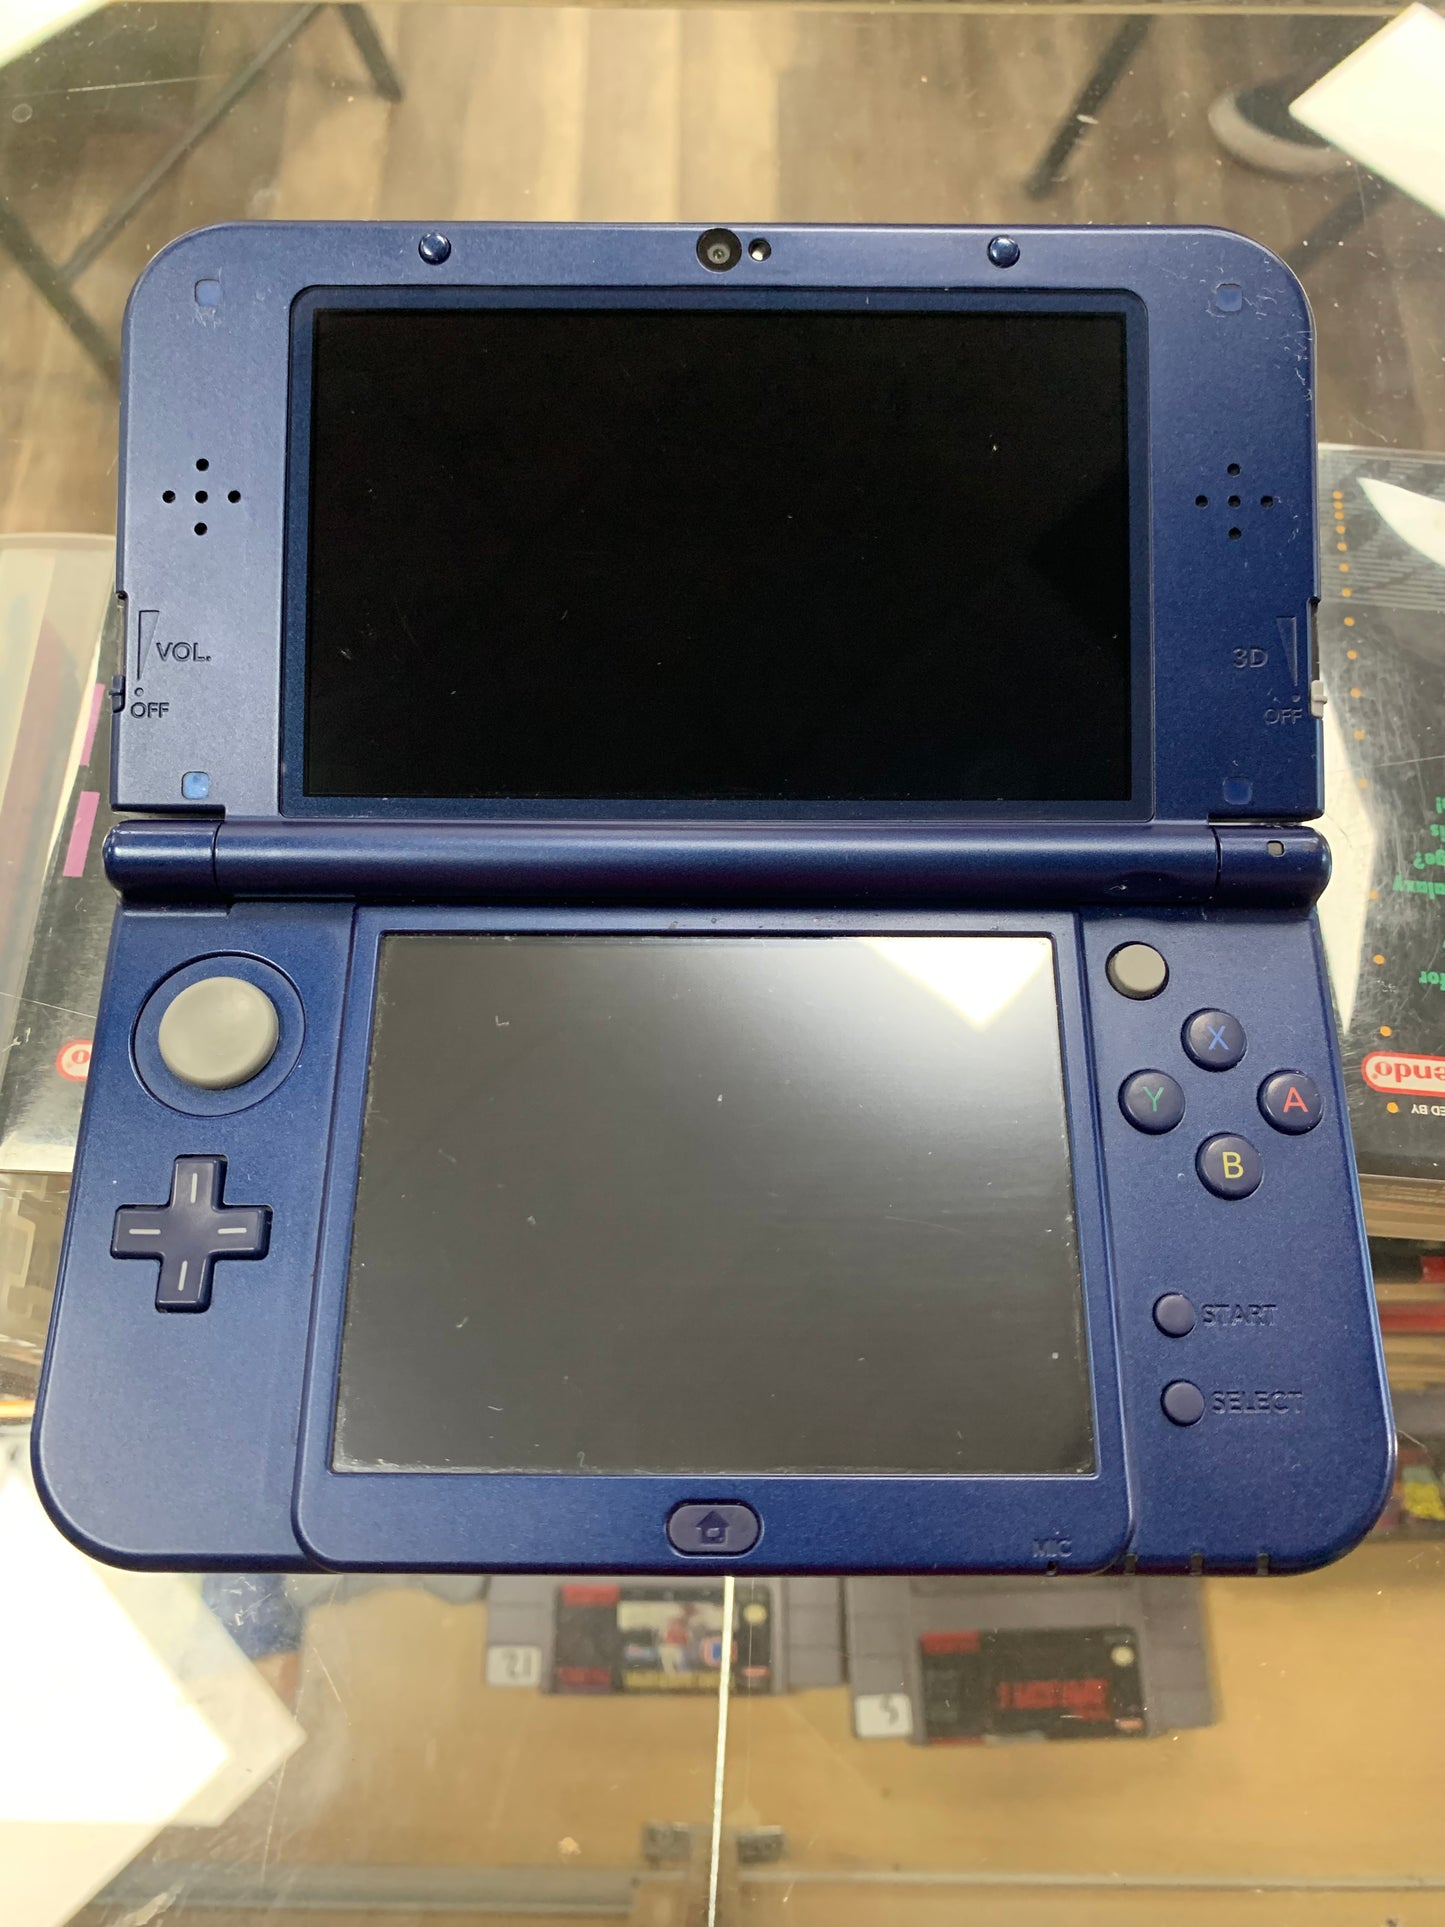 New Nintendo 3DS XL System Galaxy with Charger and Digital Games